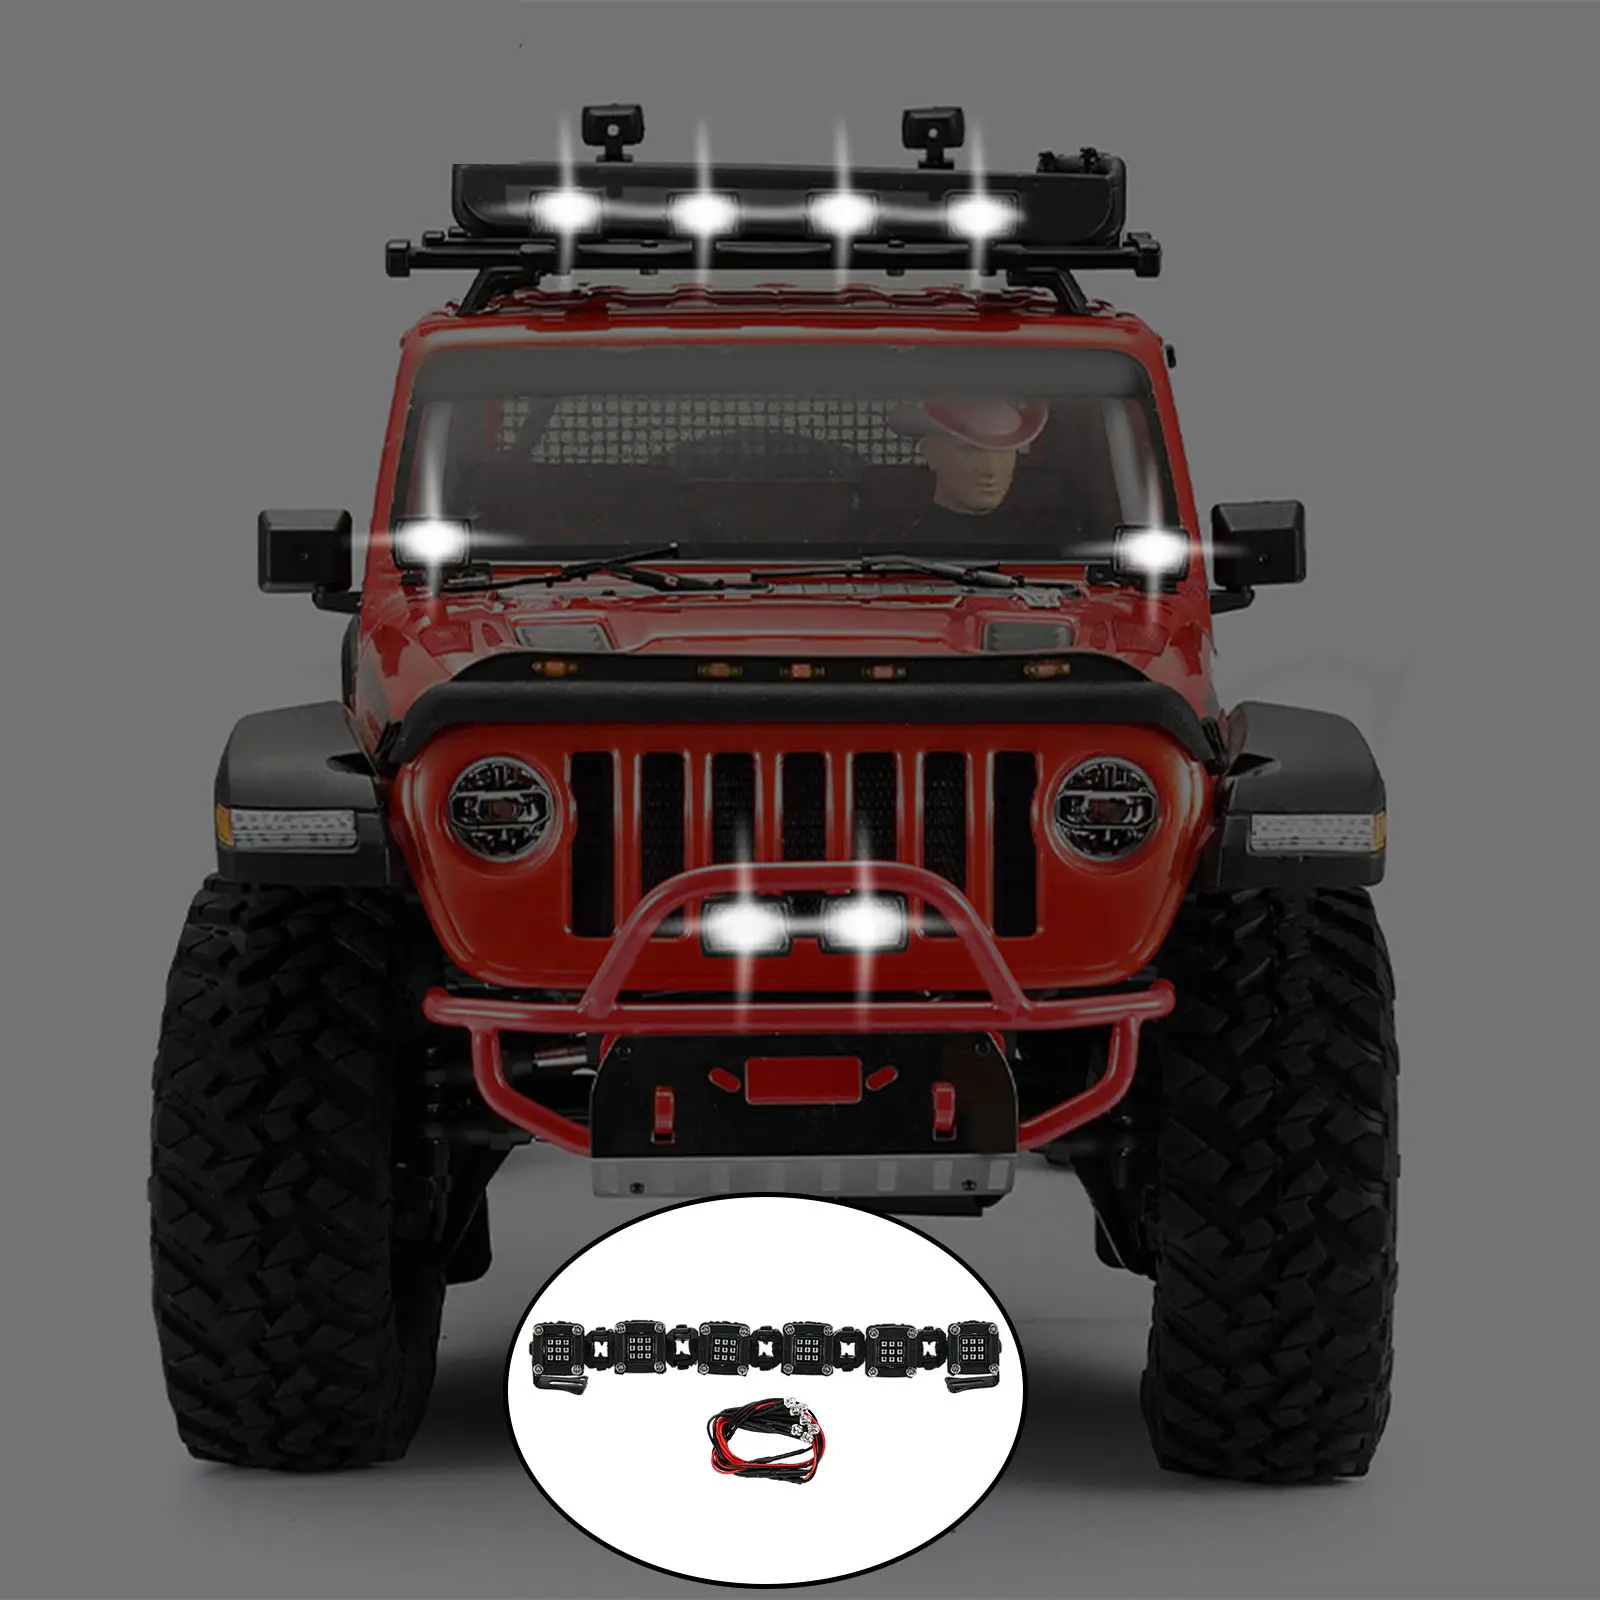 1:10 LED Lights Lamps with Shade Spare for Axial SCX10 TRX4 TRX6 RC Car Model Buggy Trucks Modification